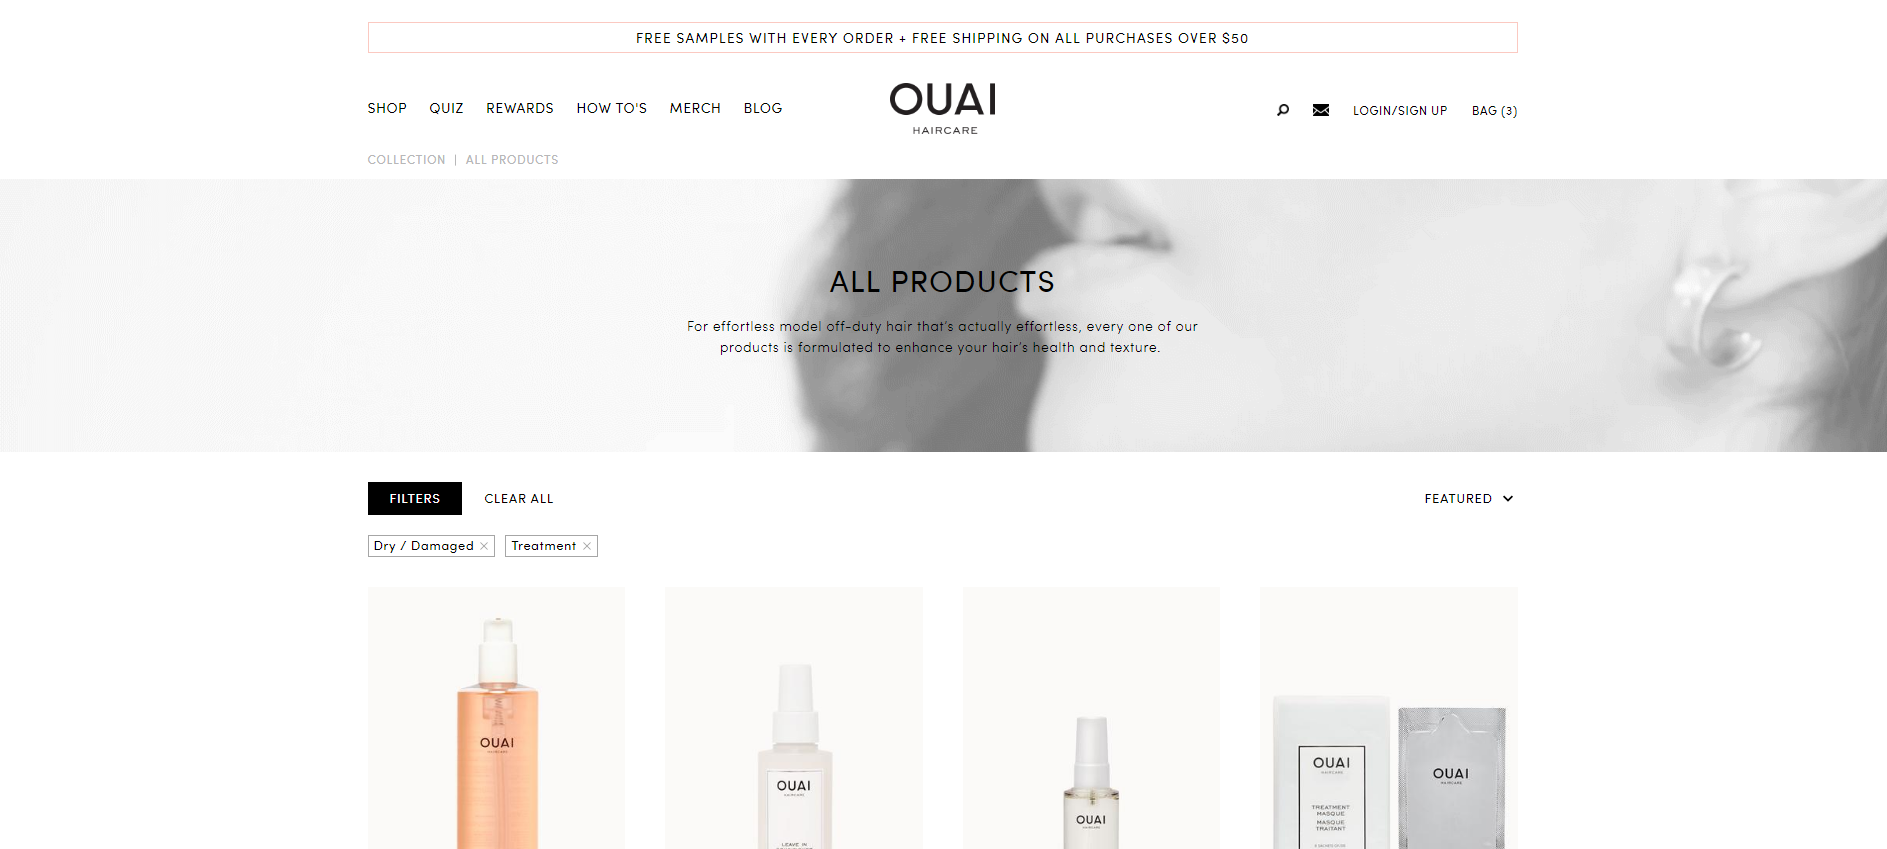 ouai haircare filtering and sorting